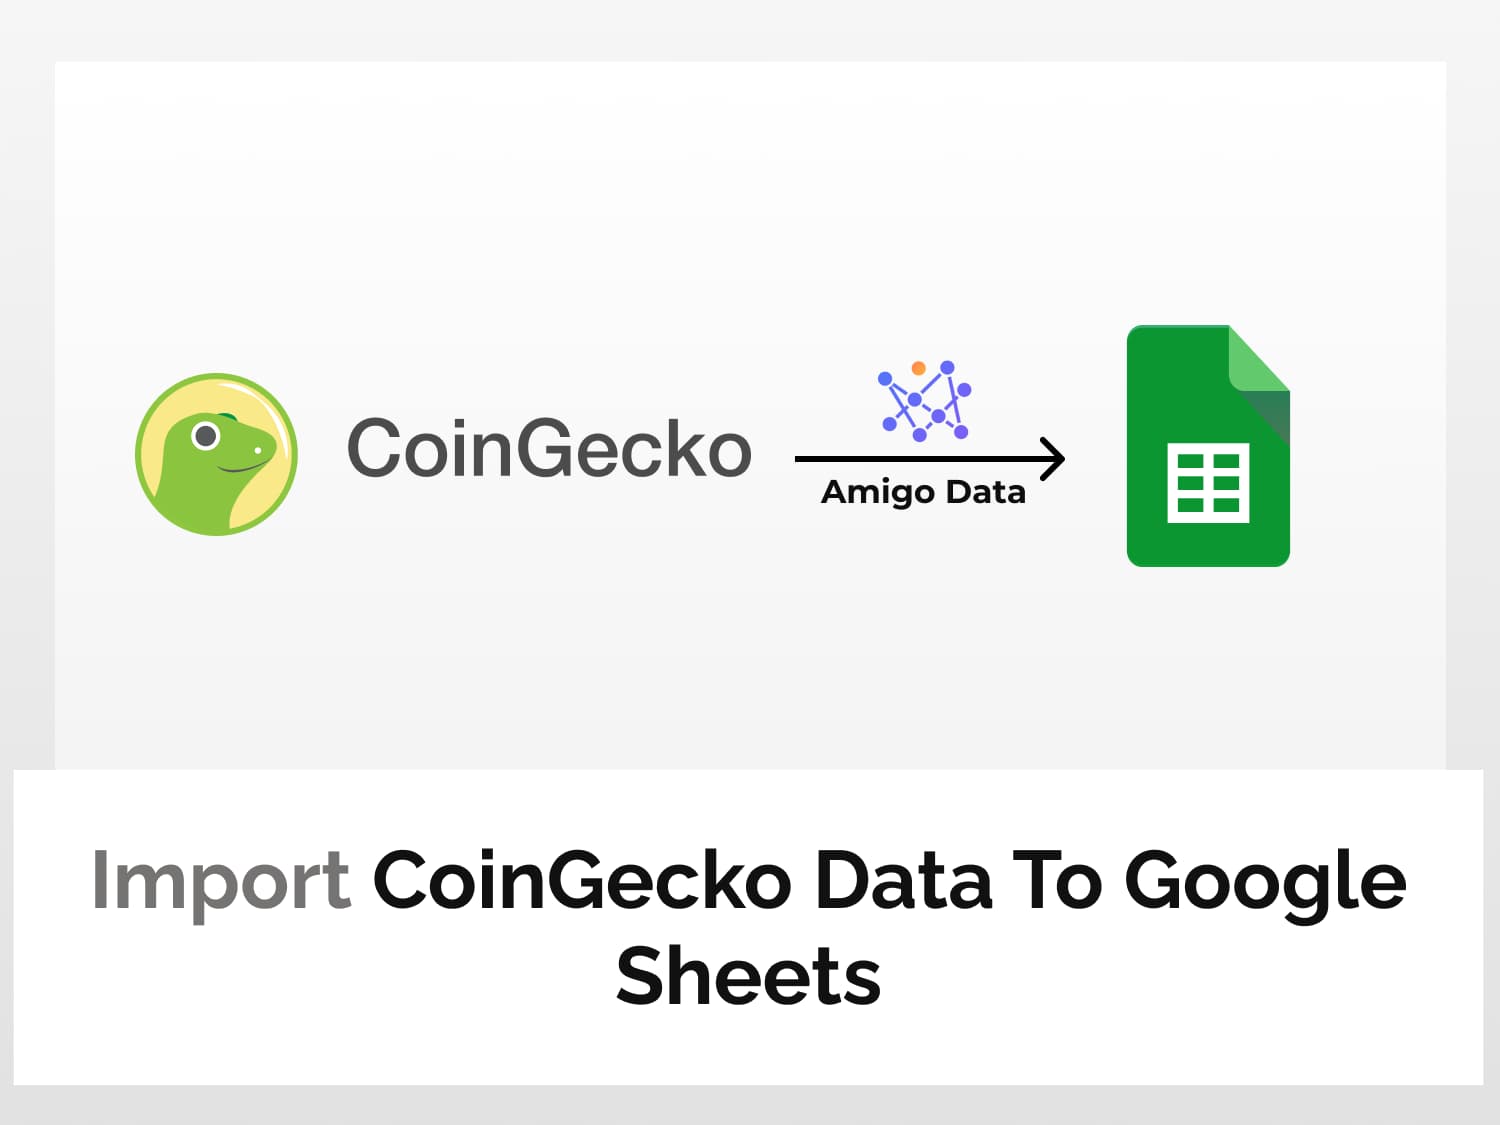 How to import CoinGecko data to Google Sheets